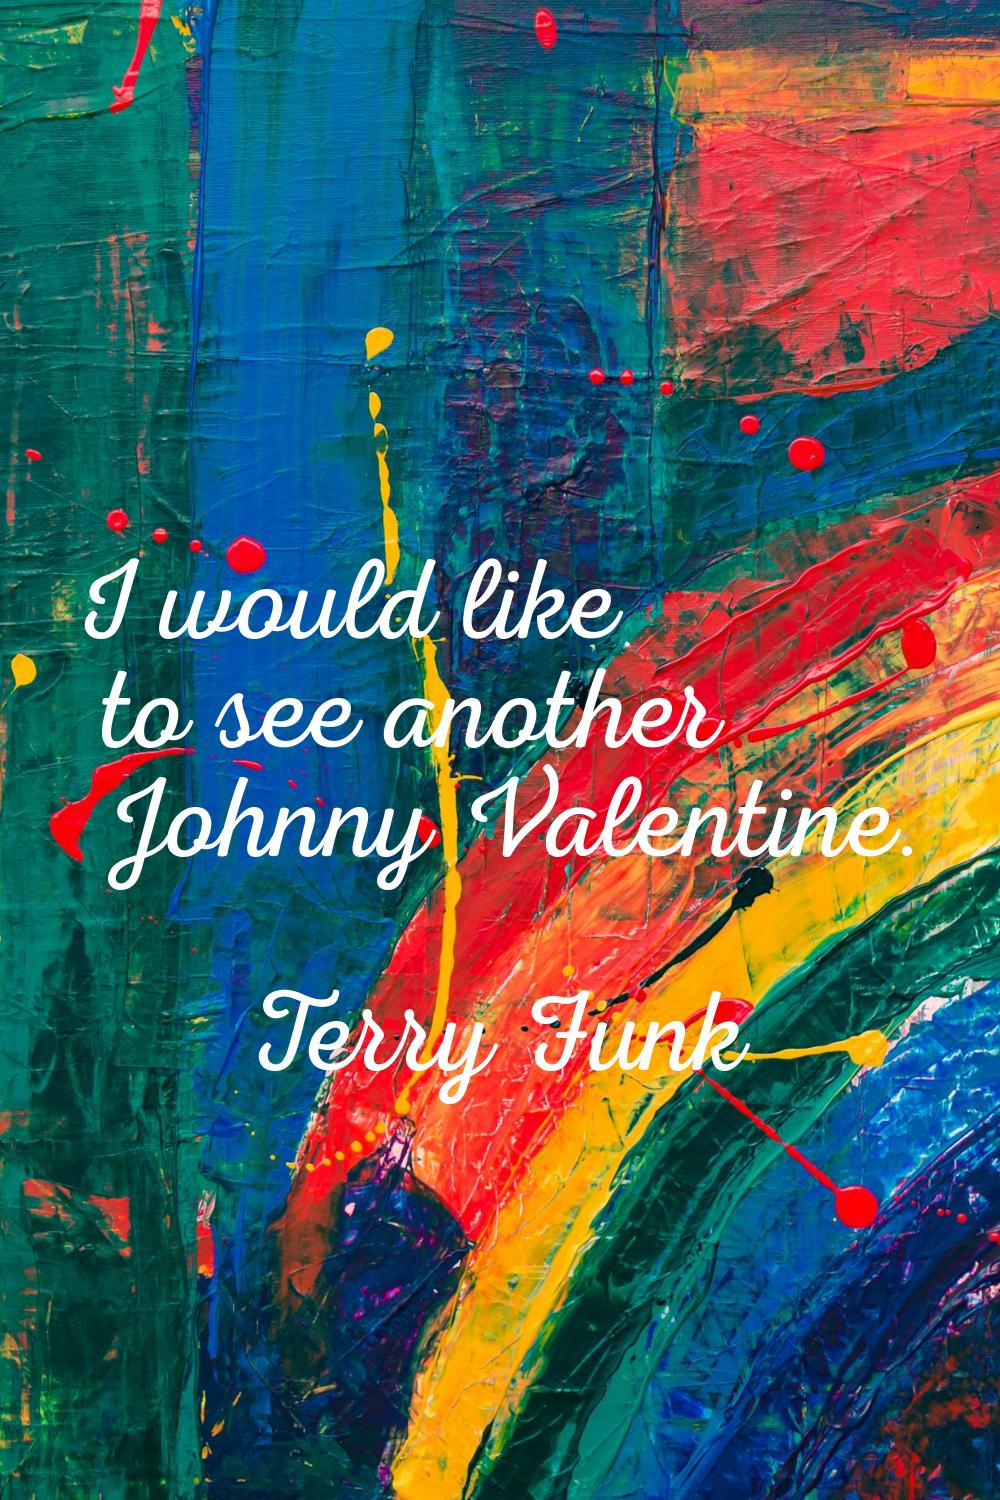 I would like to see another Johnny Valentine.